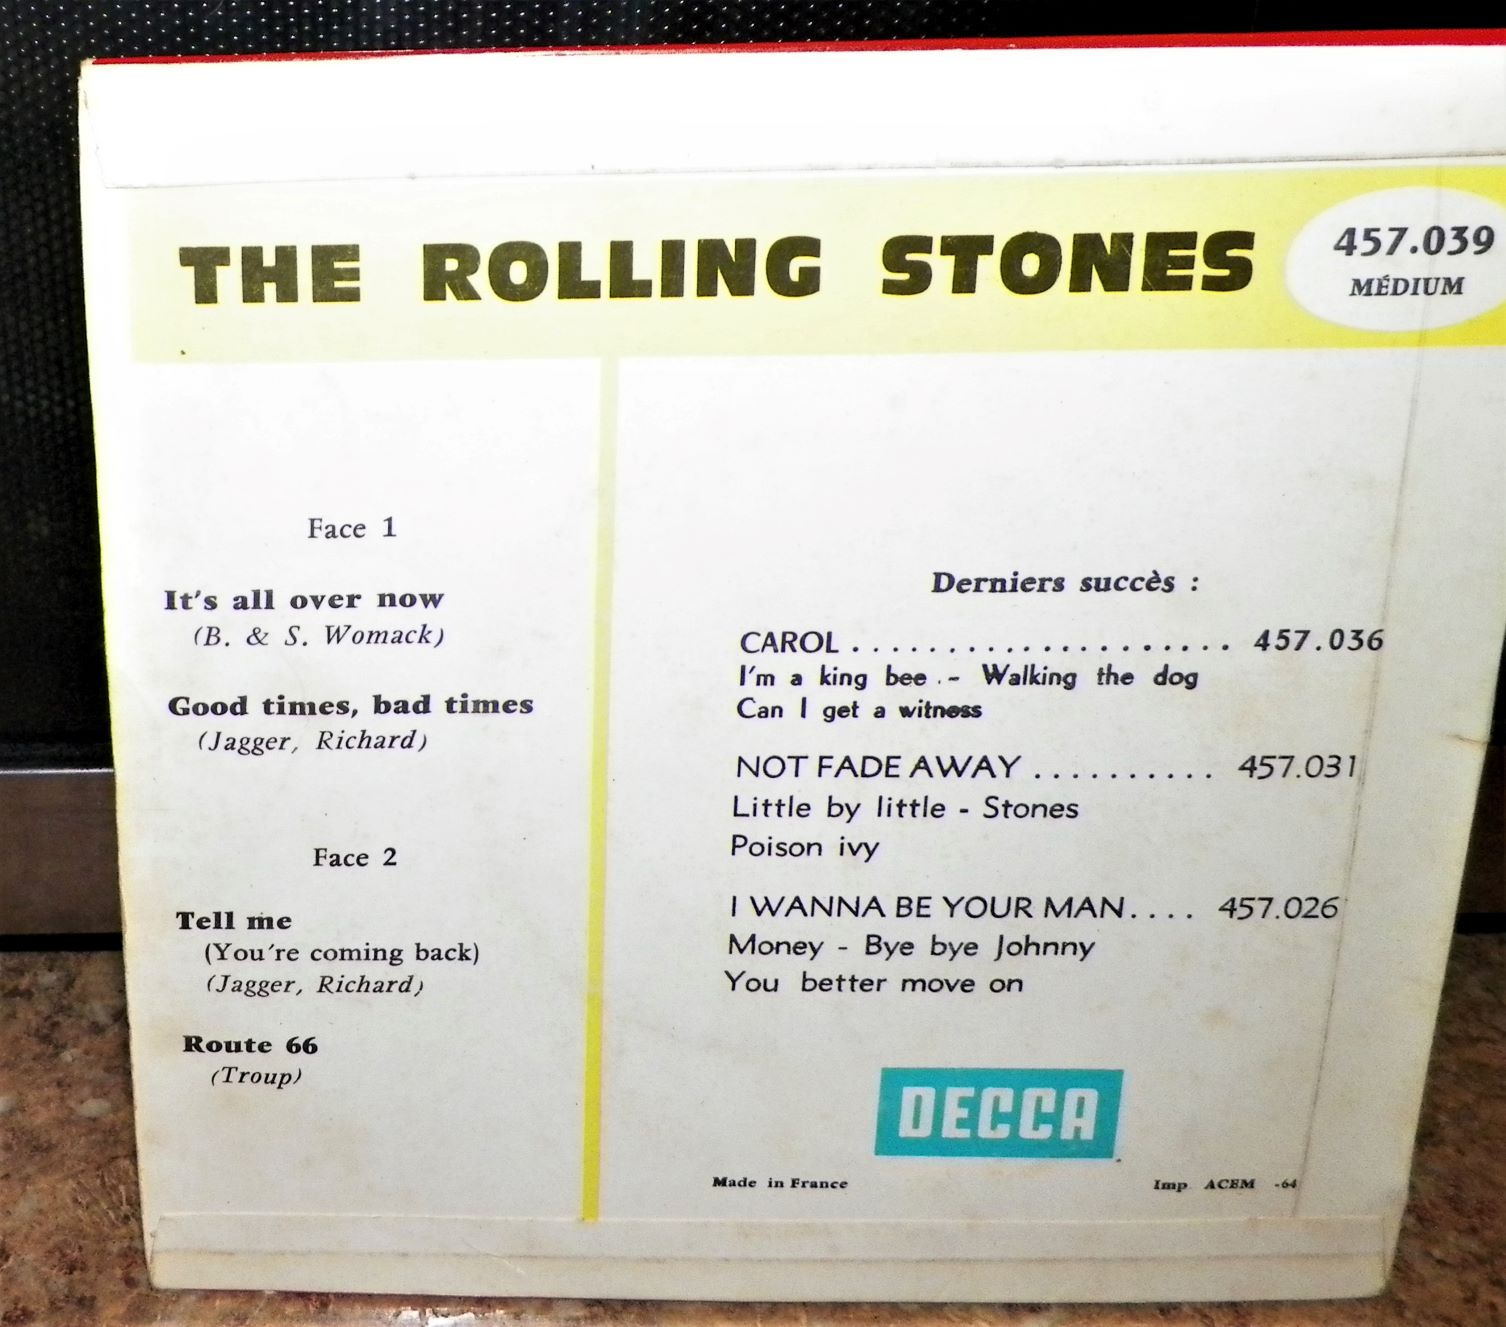 ALBUM 45 RECORD ROLLING STONES ITS ALL OVER NOW w COVER 2AA.JPG